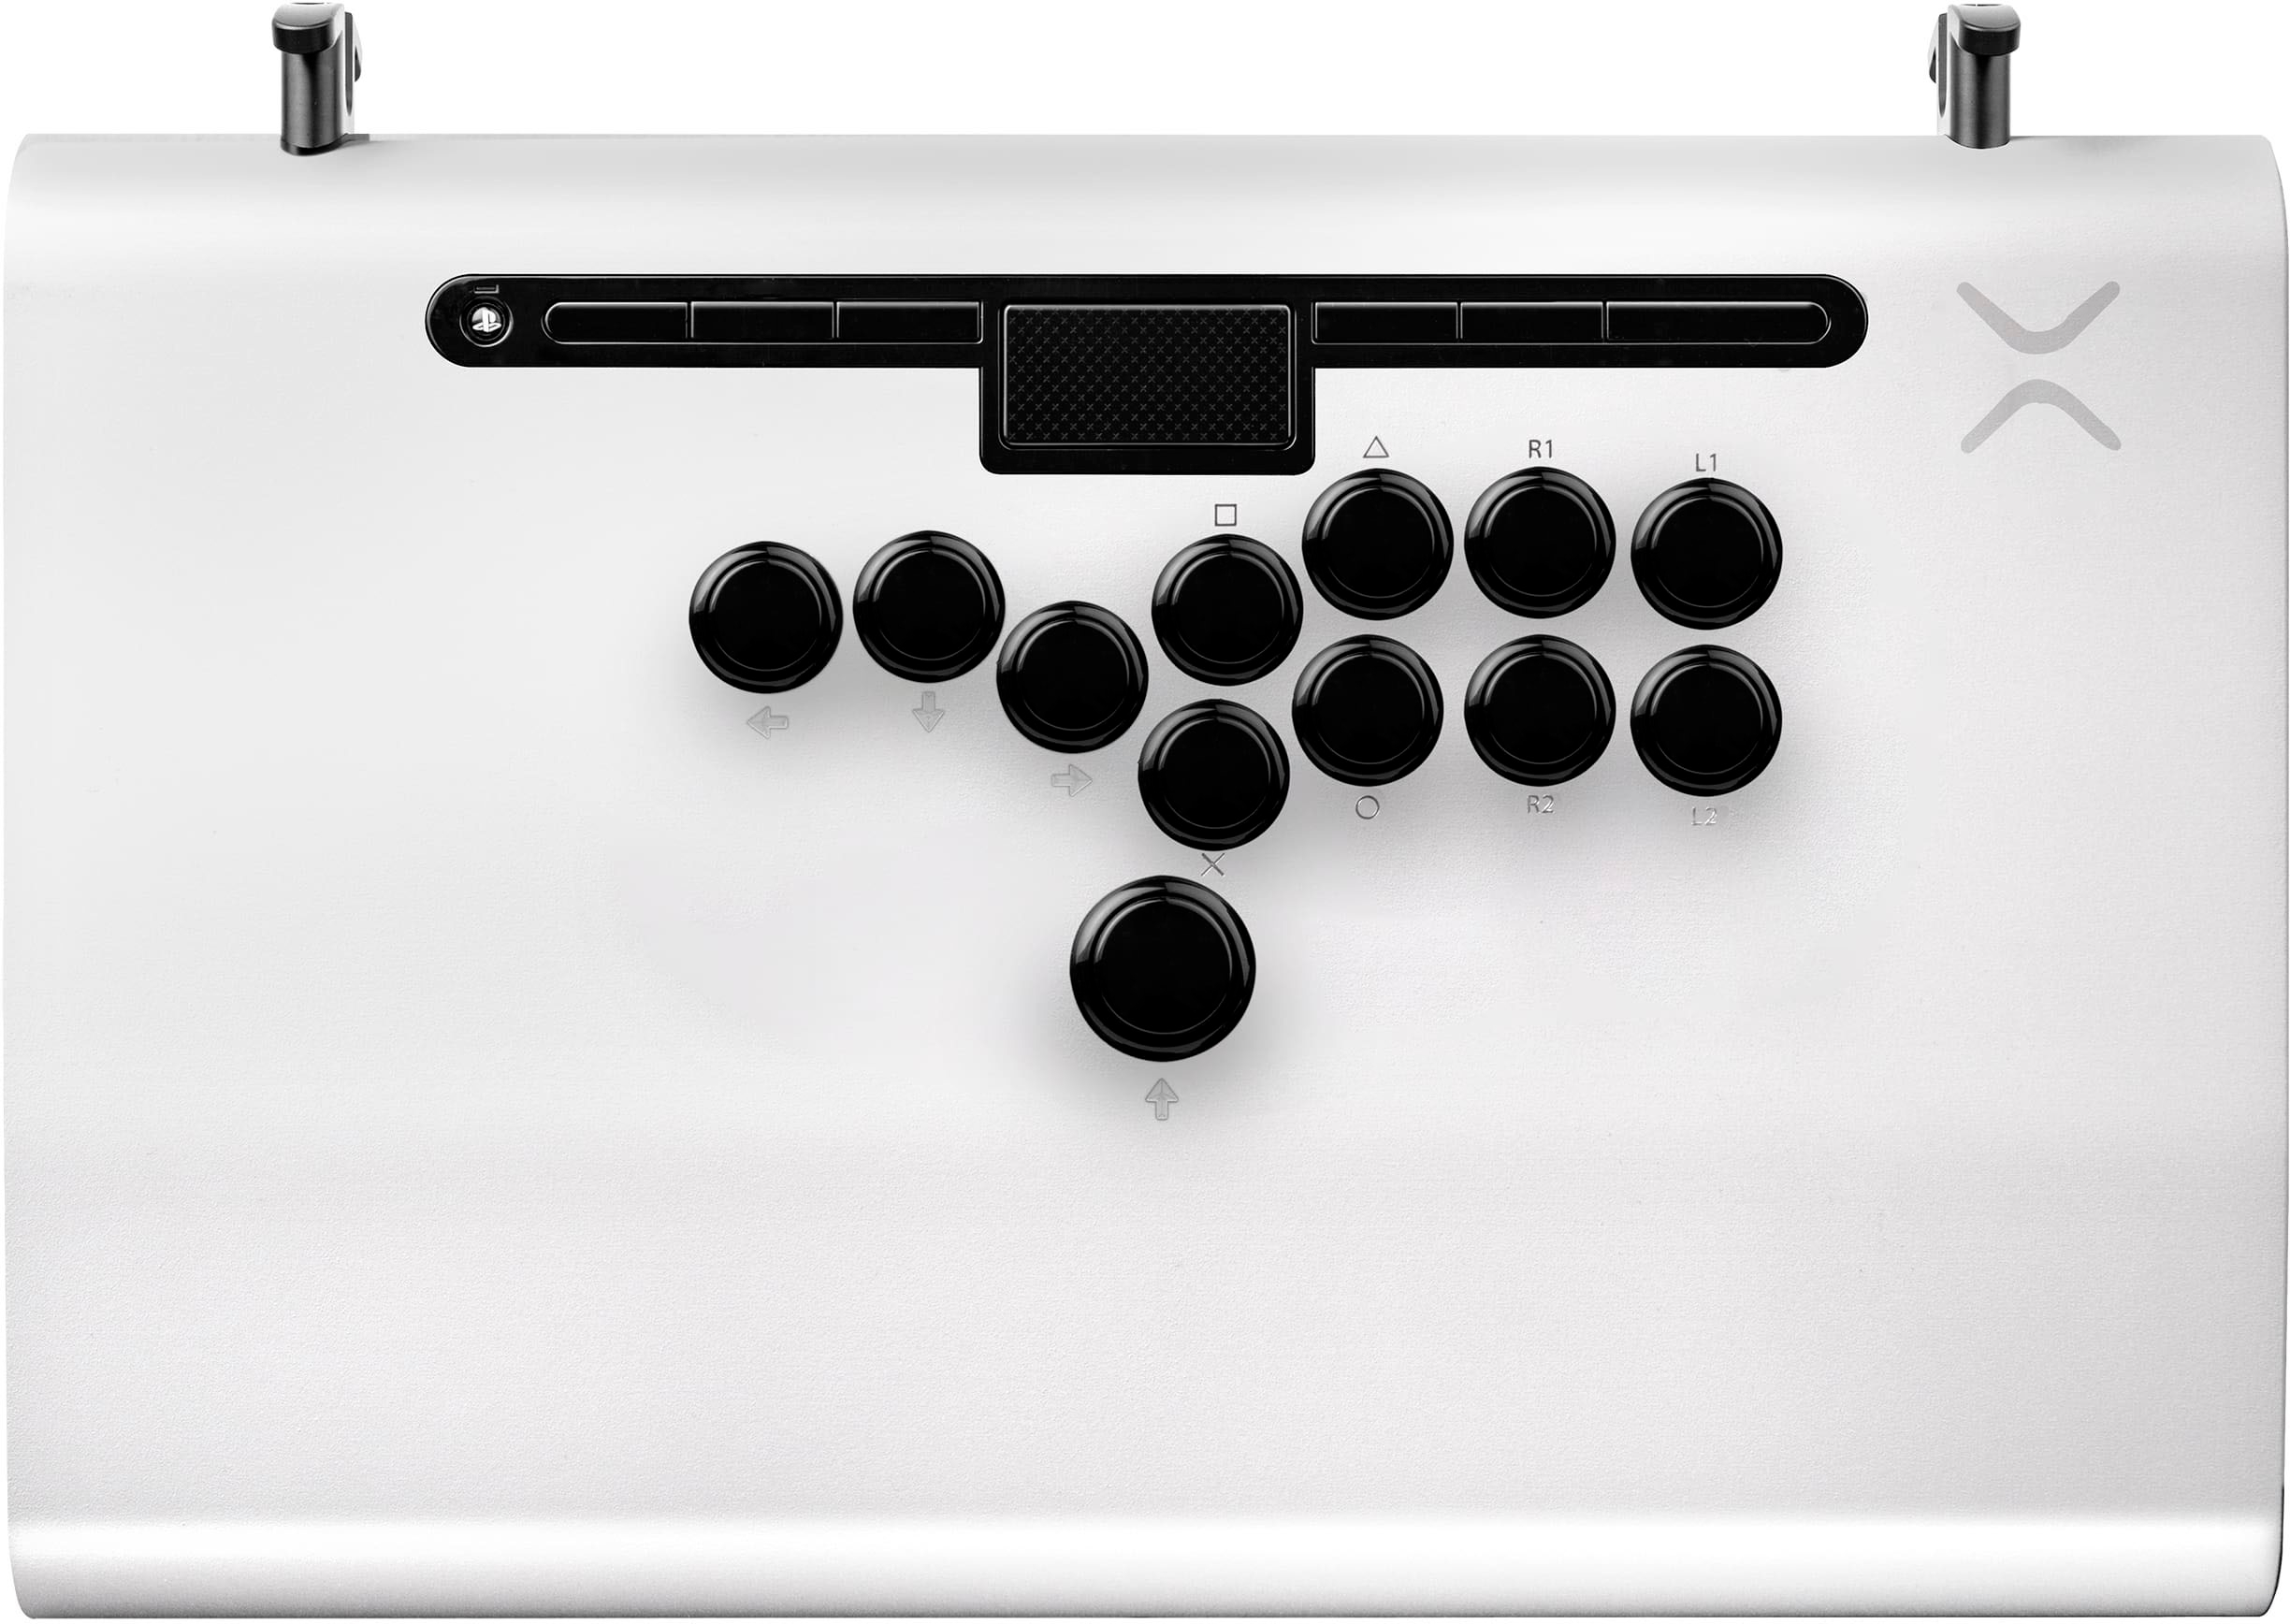 PDP Victrix Pro FS-12 Arcade Fight Stick: PlayStation 5, PlayStation 4, &  PC White 052-008-BTN-WH - Best Buy